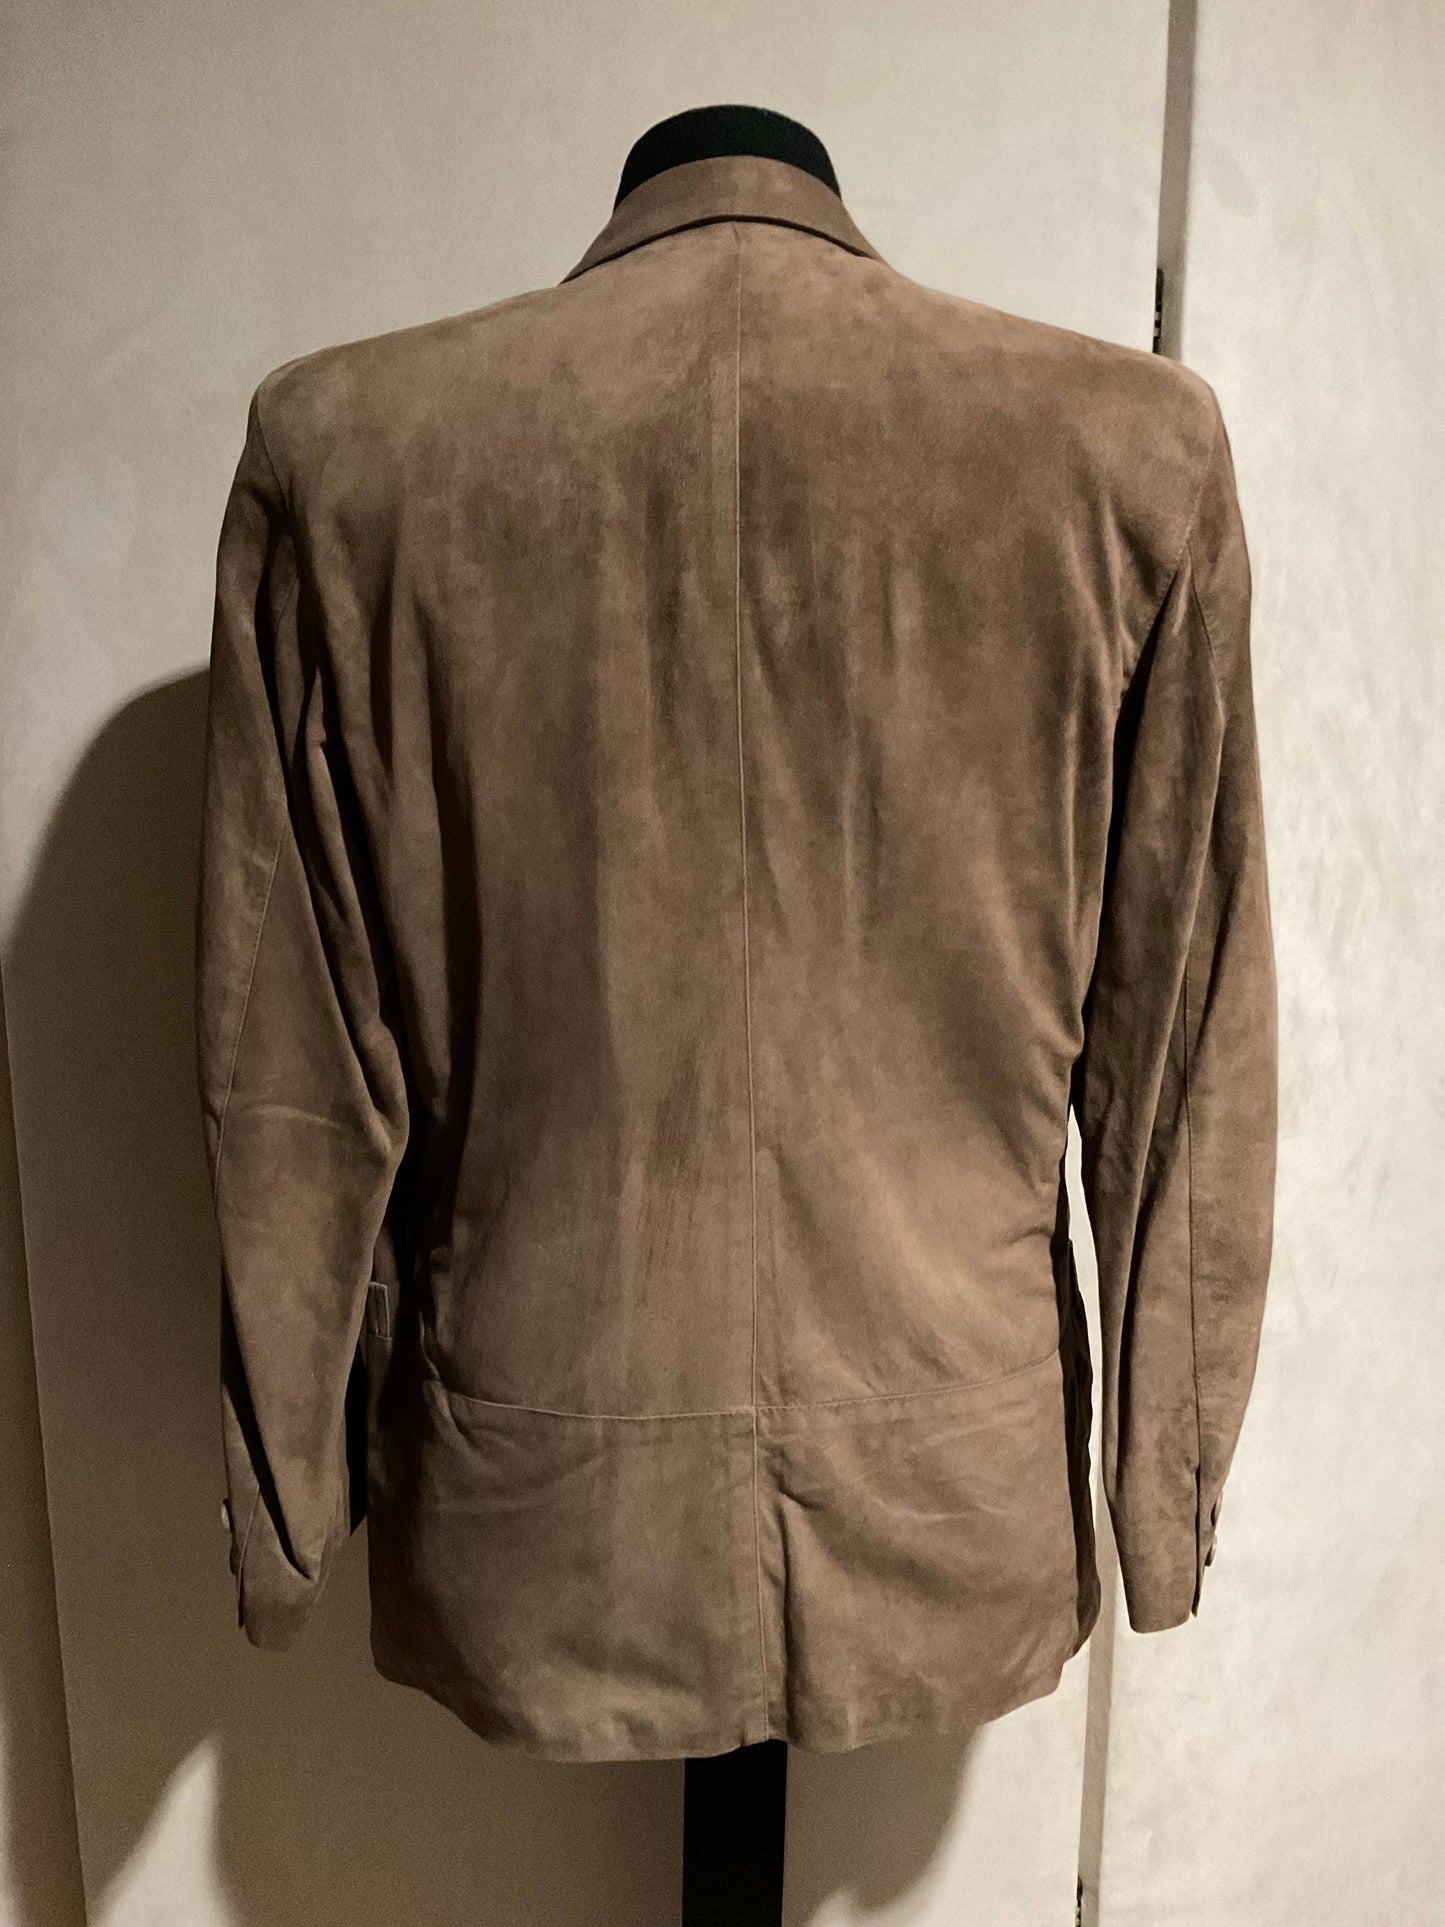 R P SUEDE DOUBLE BREASTED BLAZER JACKET / TAUPE / MEDIUM / MADE IN ITALY